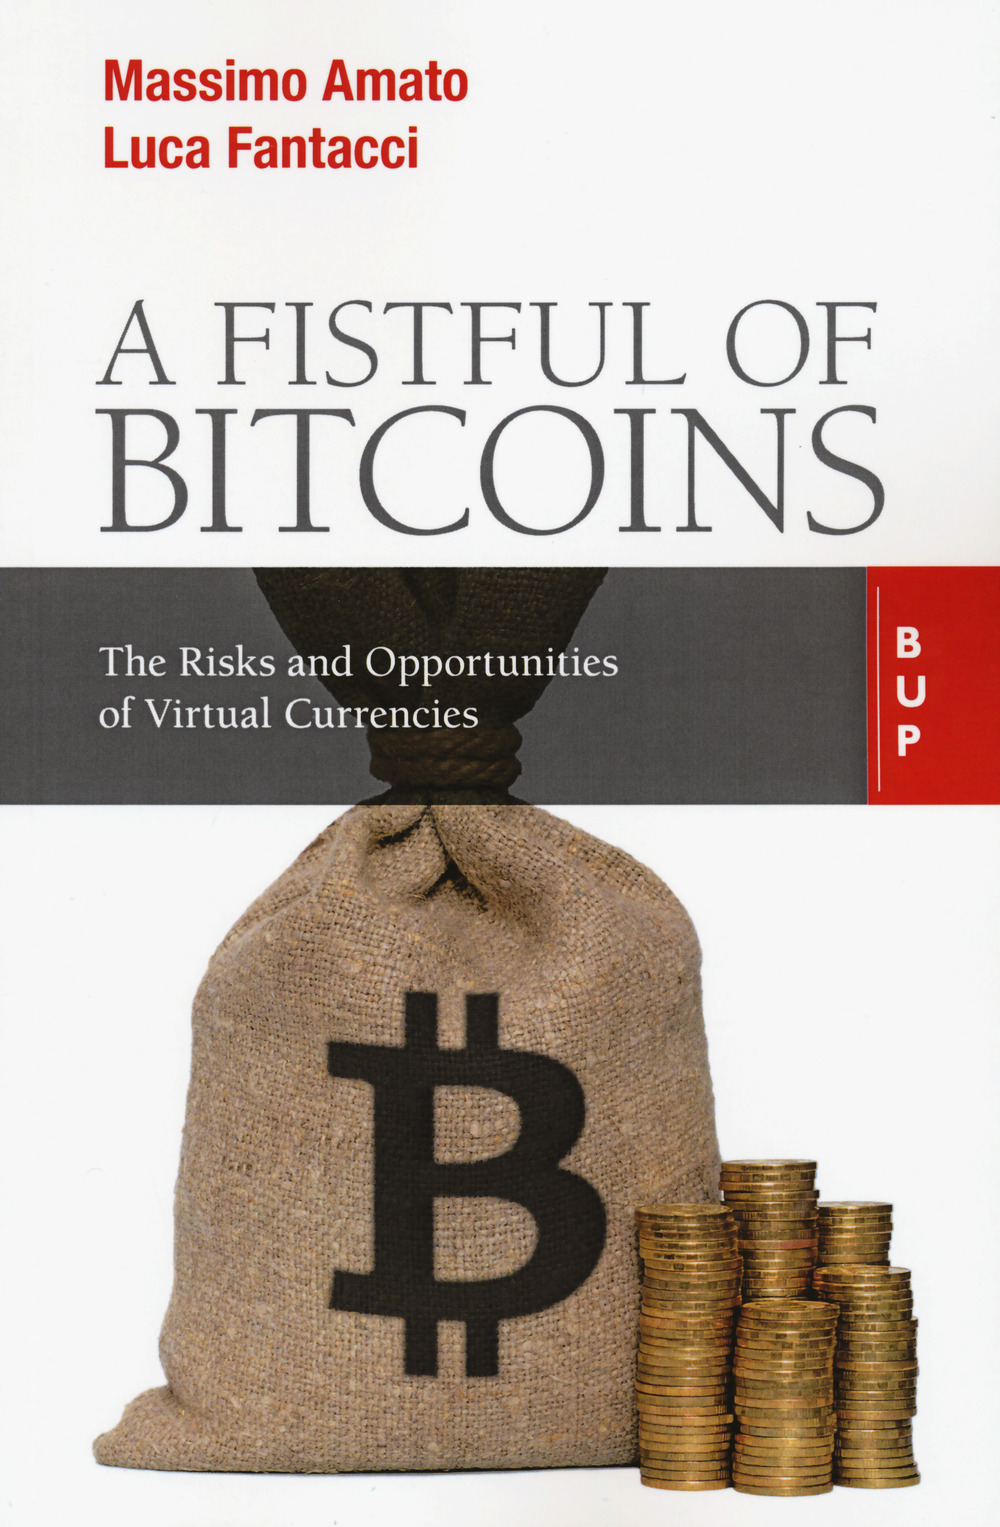 A fistful of bitcoins. The risks and opportunities of virtual currencies